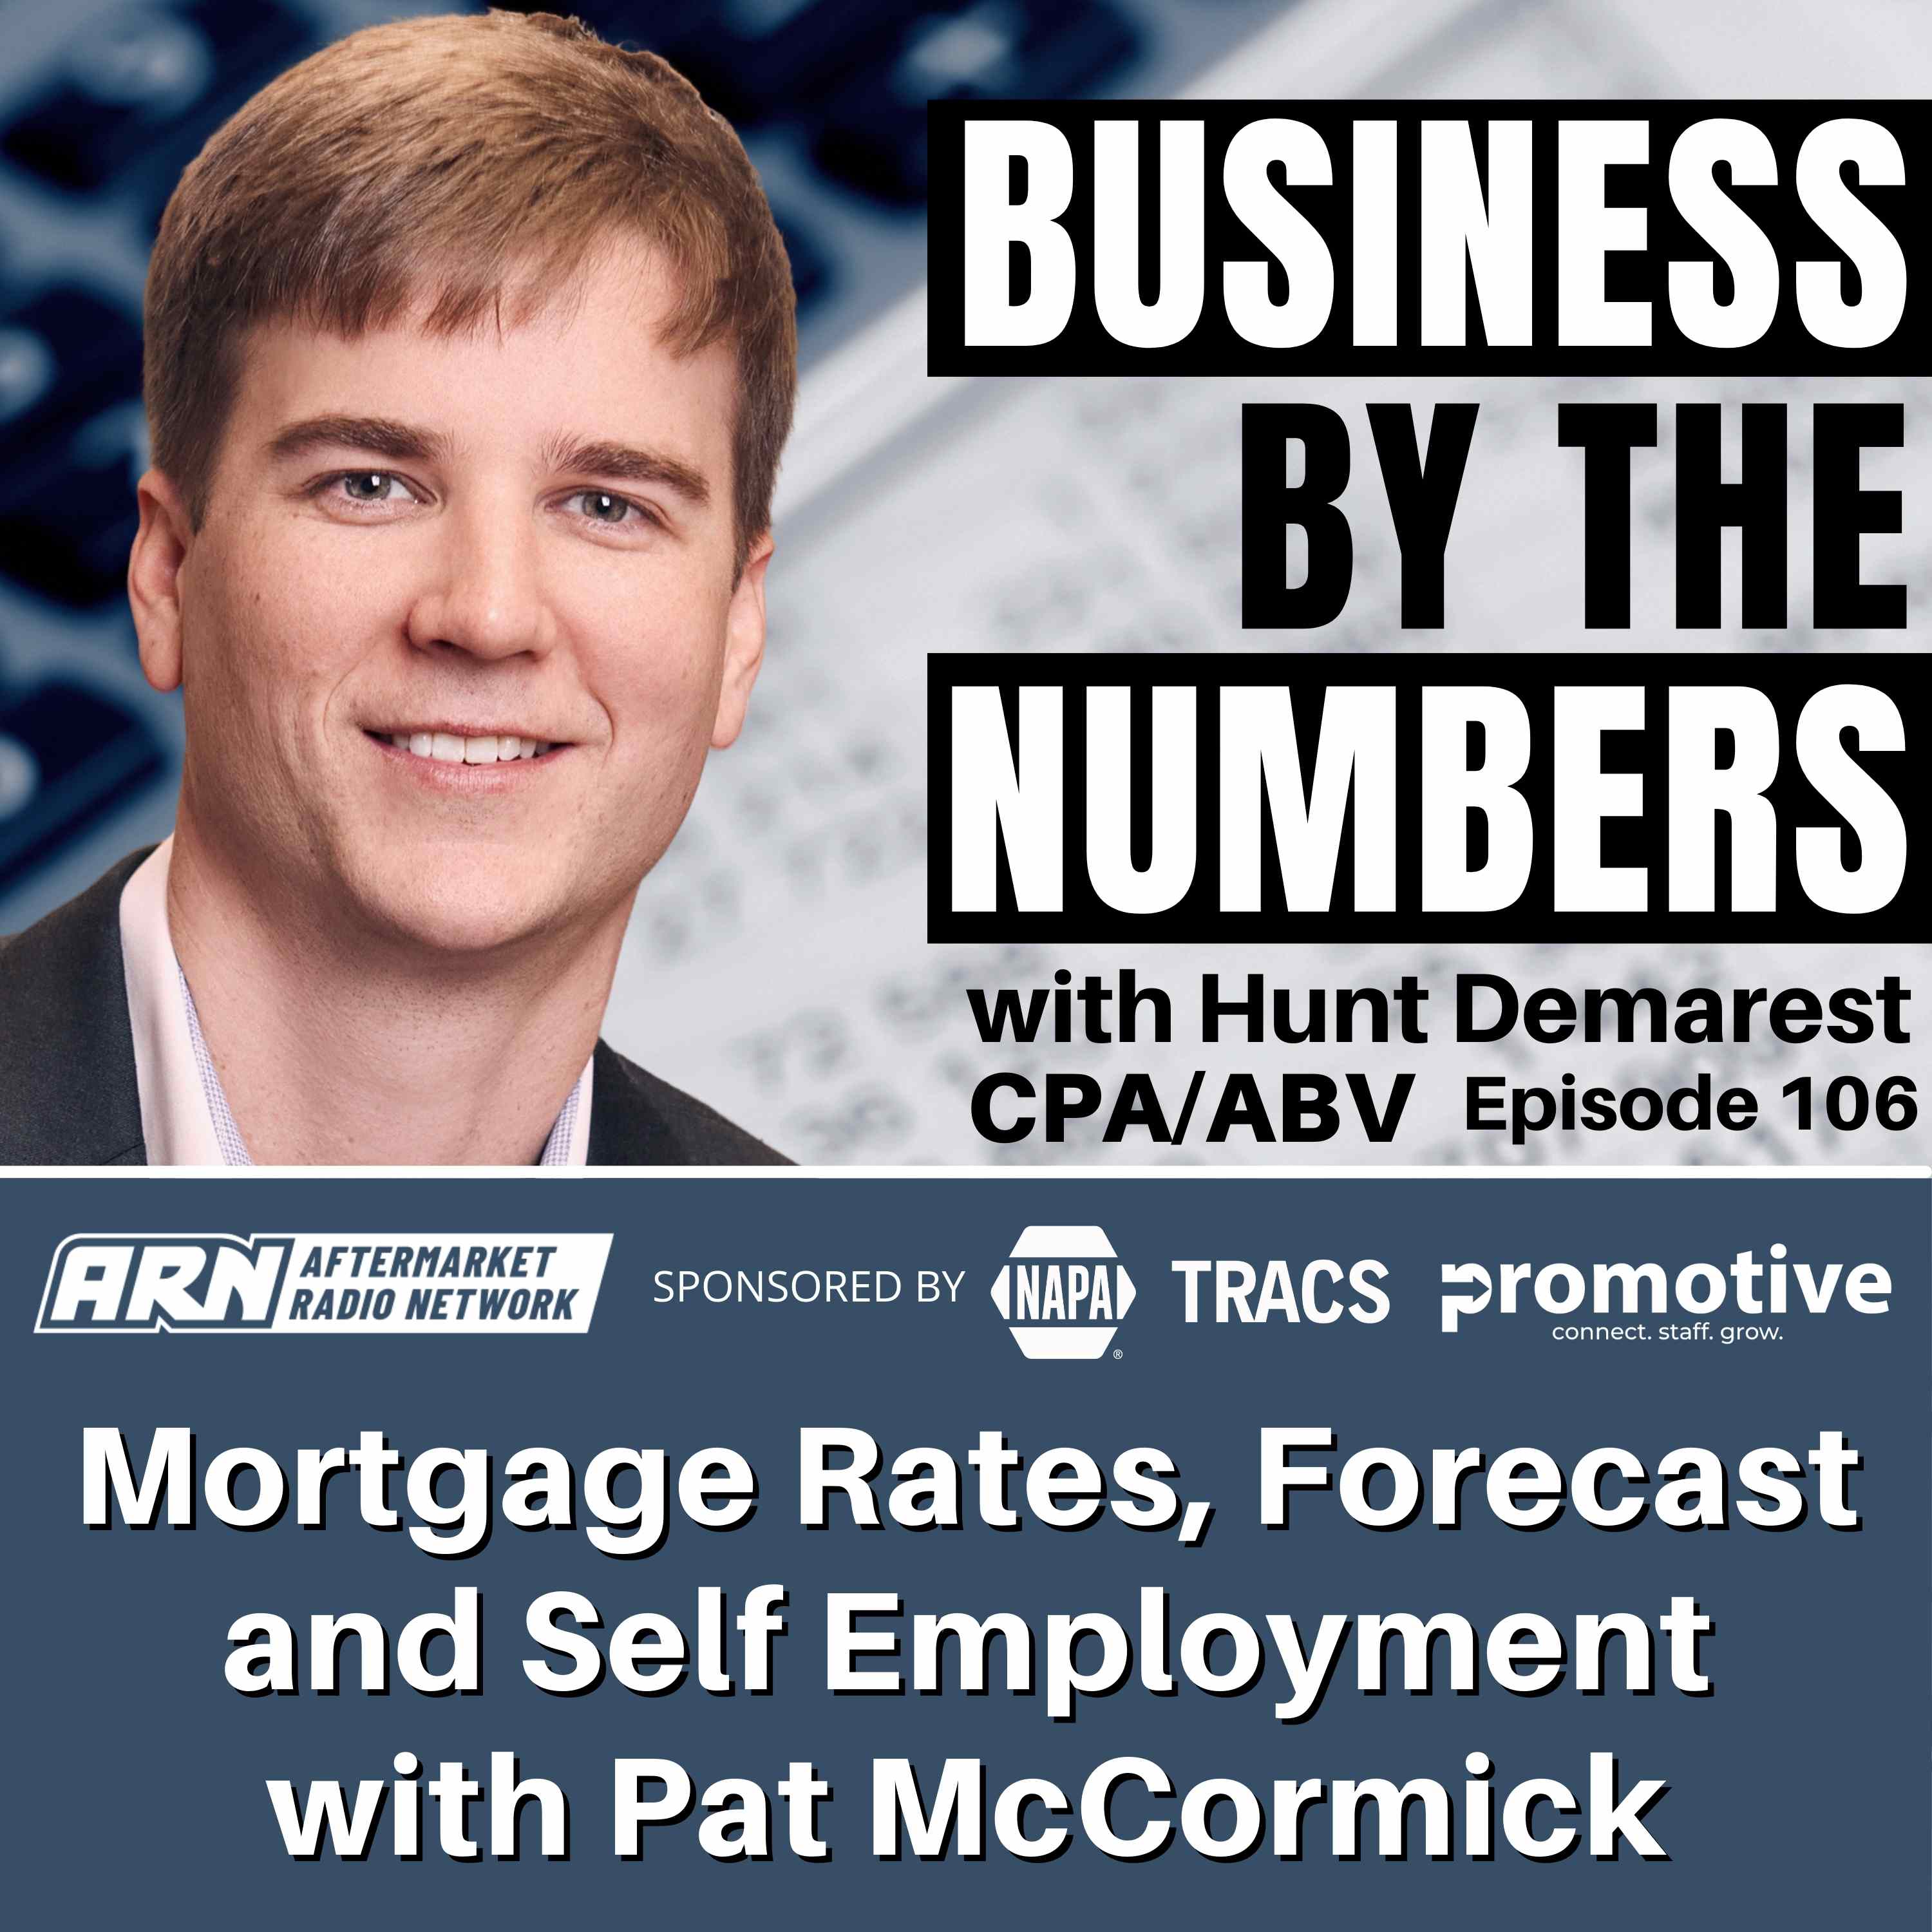 Mortgage Rates, Forecast, Self Employment with Pat McCormick [E106] - Business By The Numbers